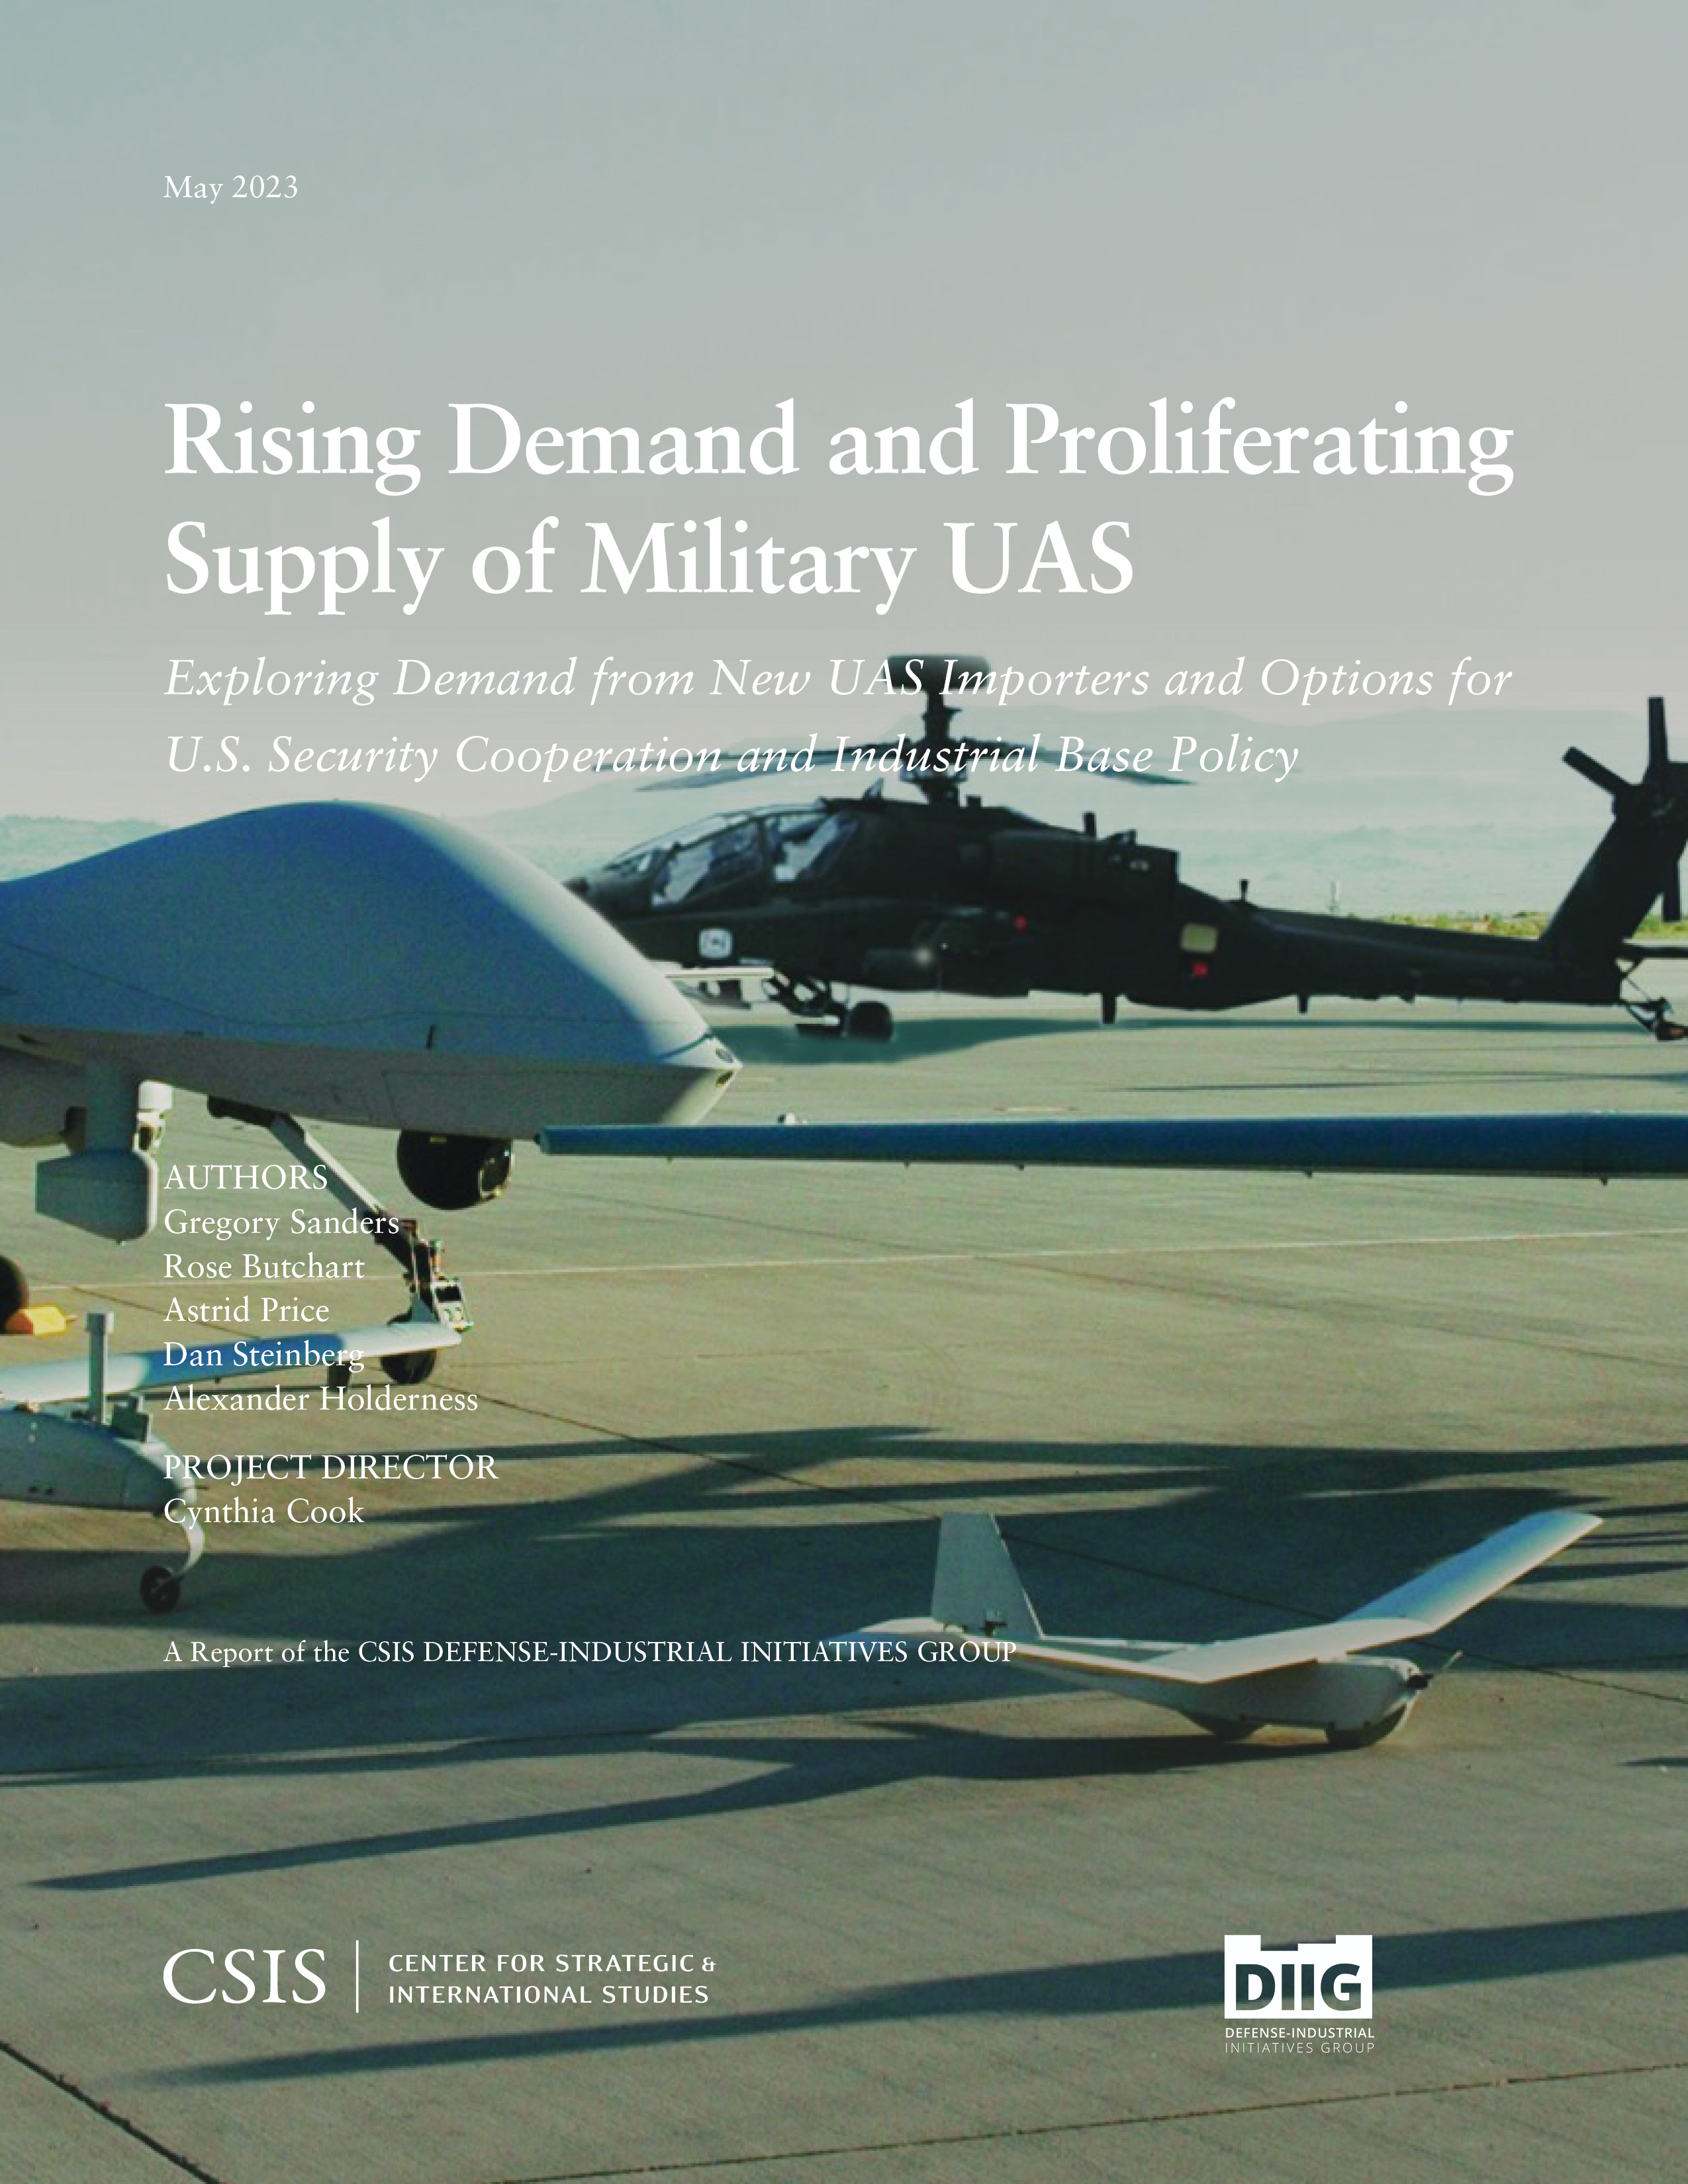 Rising Demand and Proliferating Supply of Military UAS: Exploring Demand from New UAS Importers and Options for U.S. Security Cooperation and Industrial Base Policy